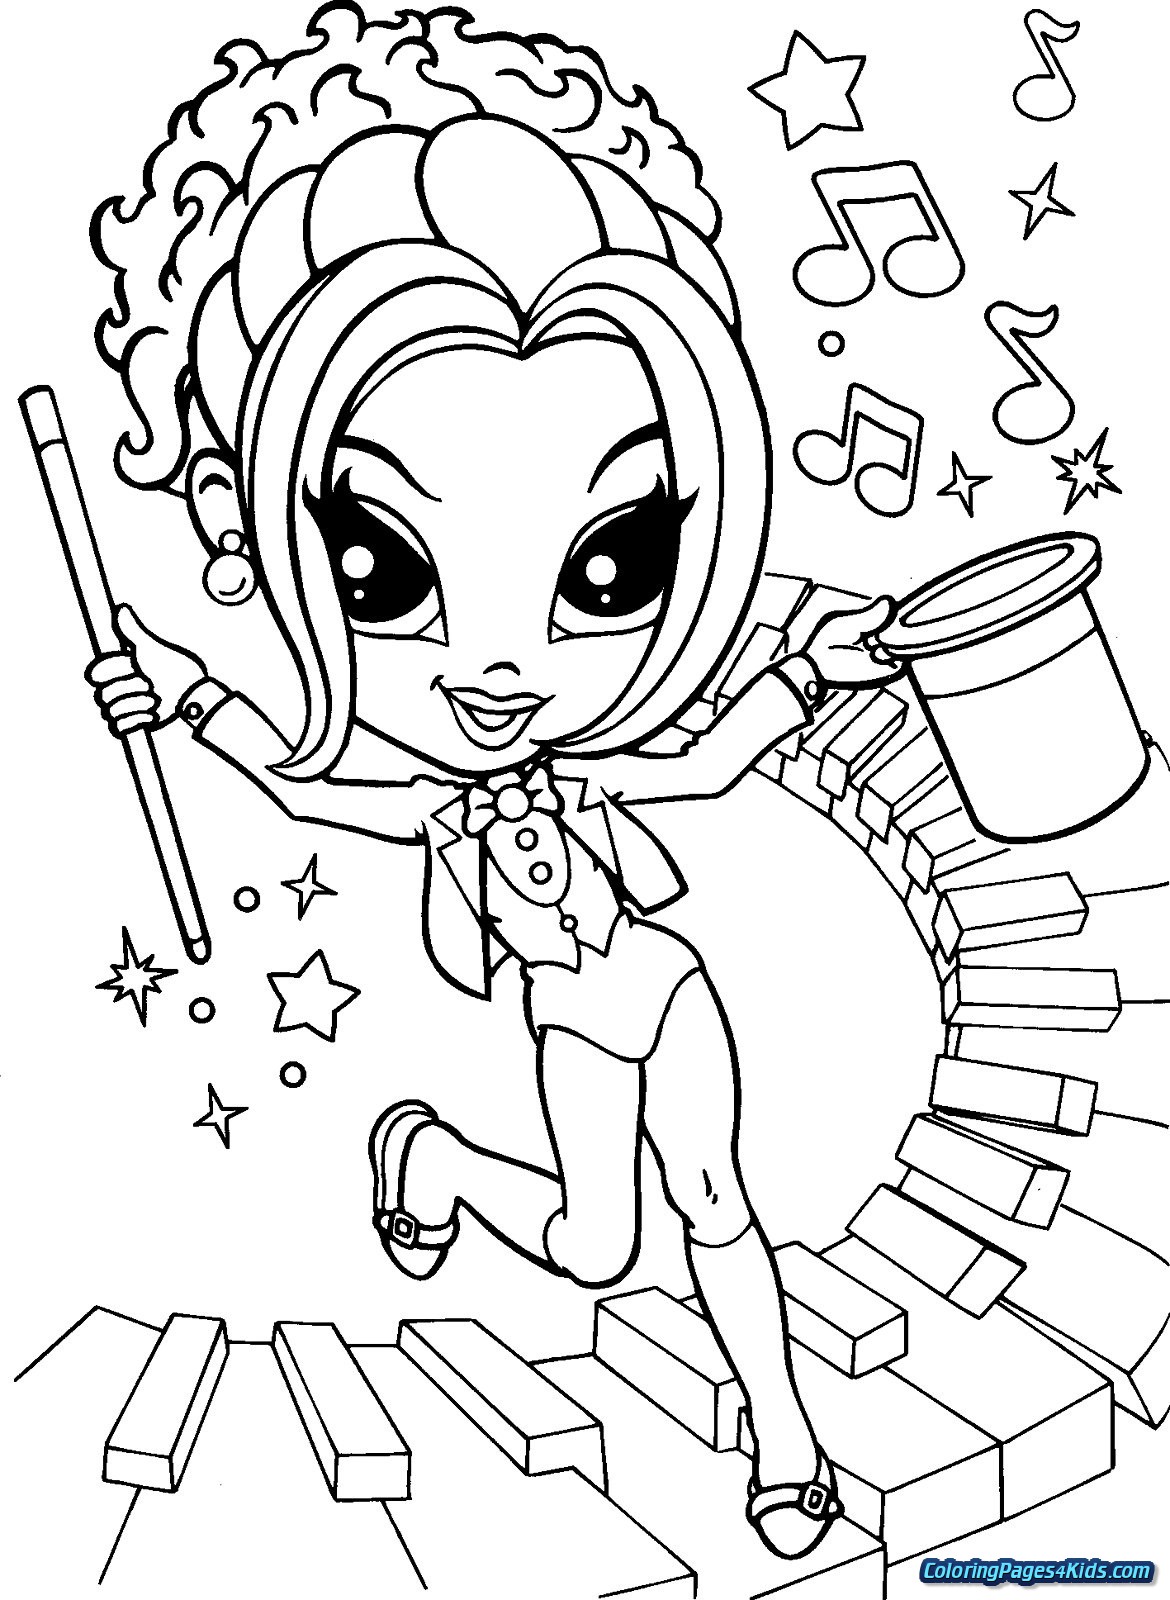 Five Nights At Freddy'S FNAF Coloring Pages - Coloring Pages For Kids